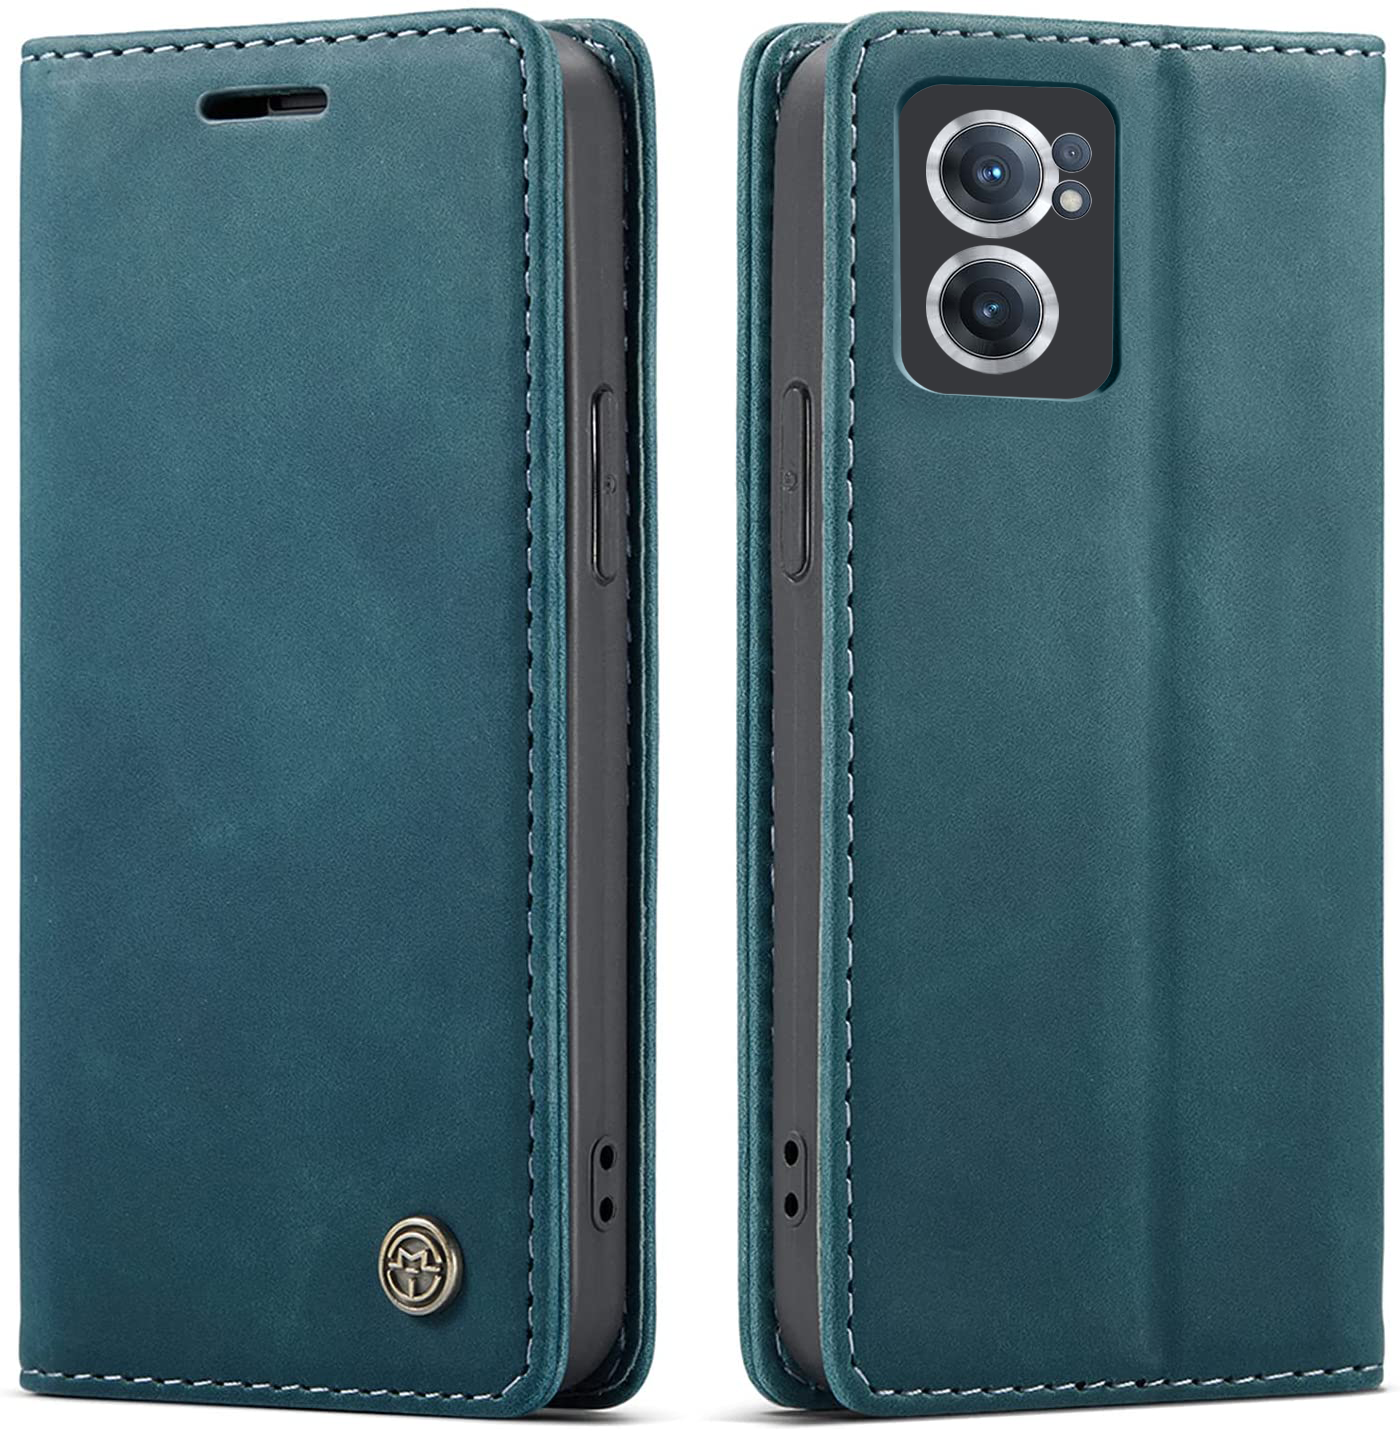 Oneplus Nord CE 2 full body protection Leather Wallet flip case cover by Excelsior